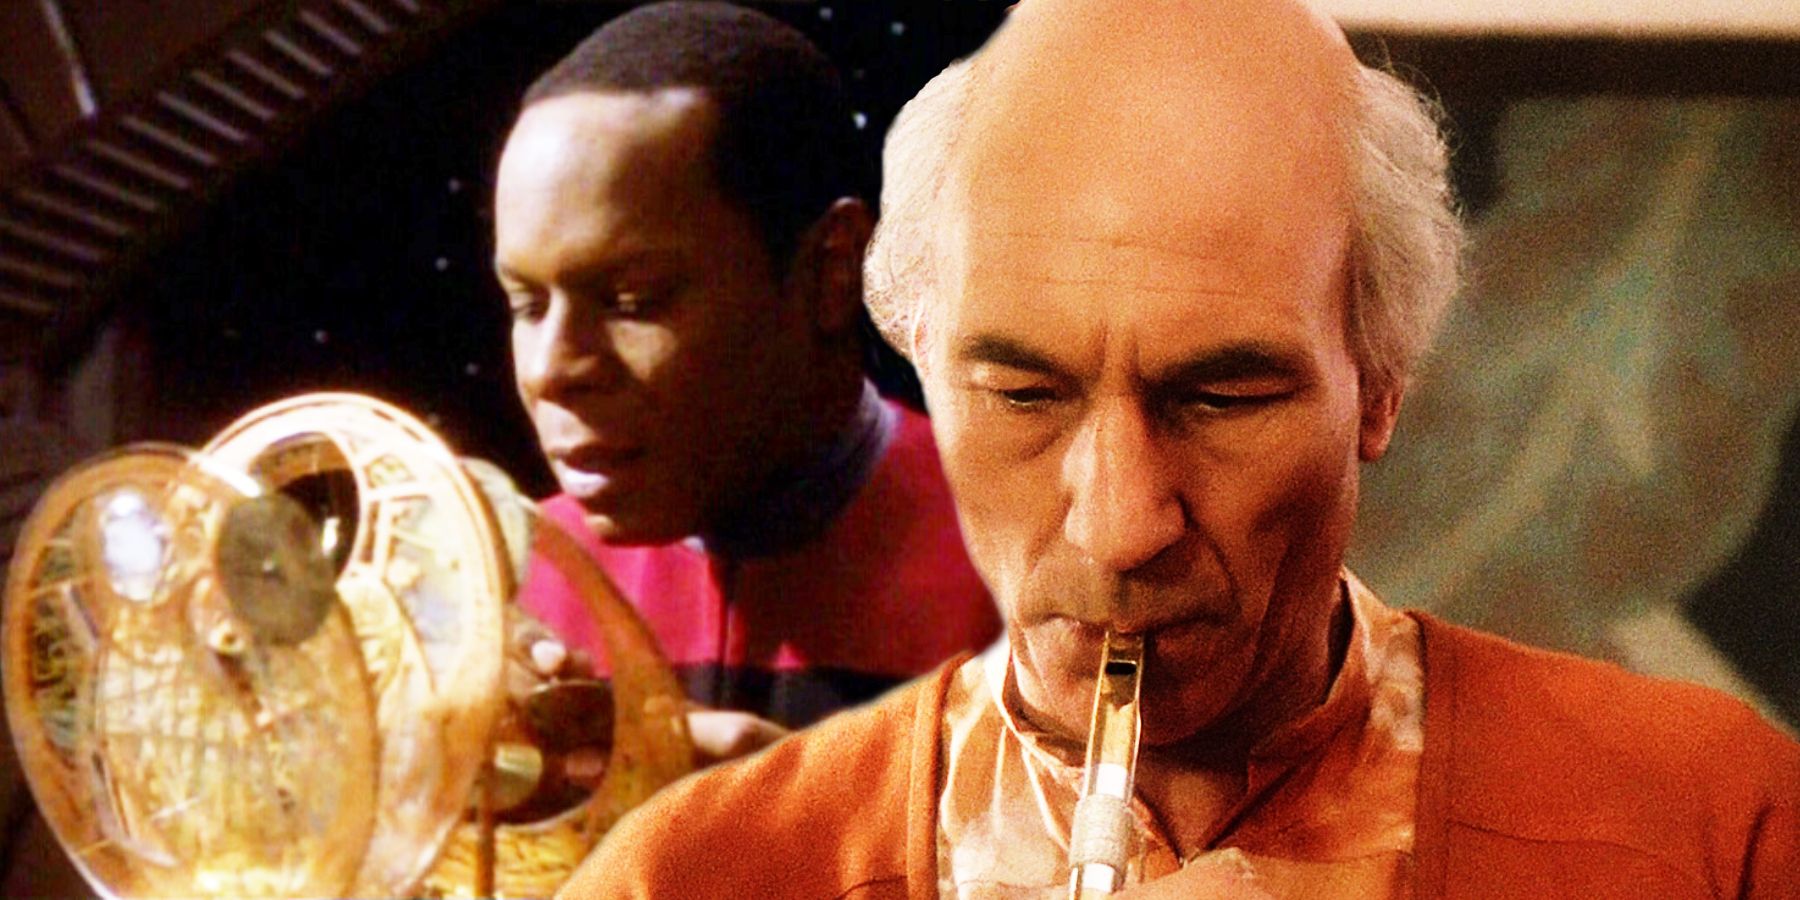 Sisko building a clock, Picard playing a flute